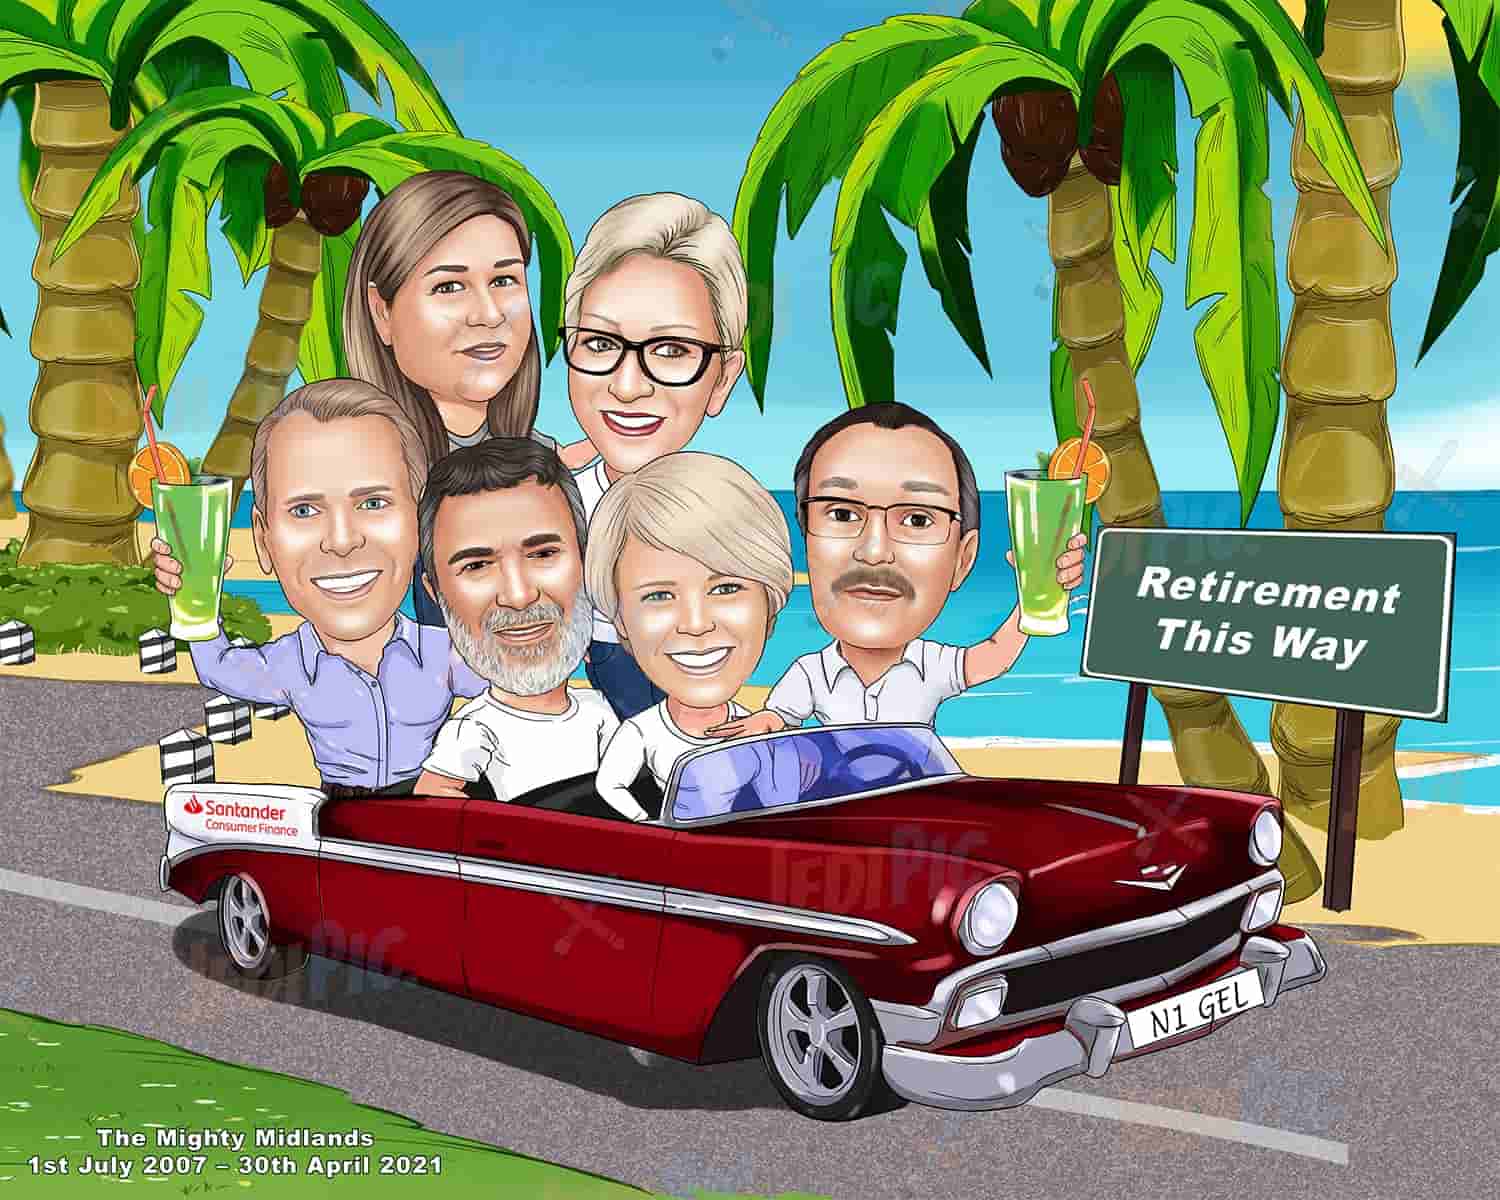 Family Caricature in Car